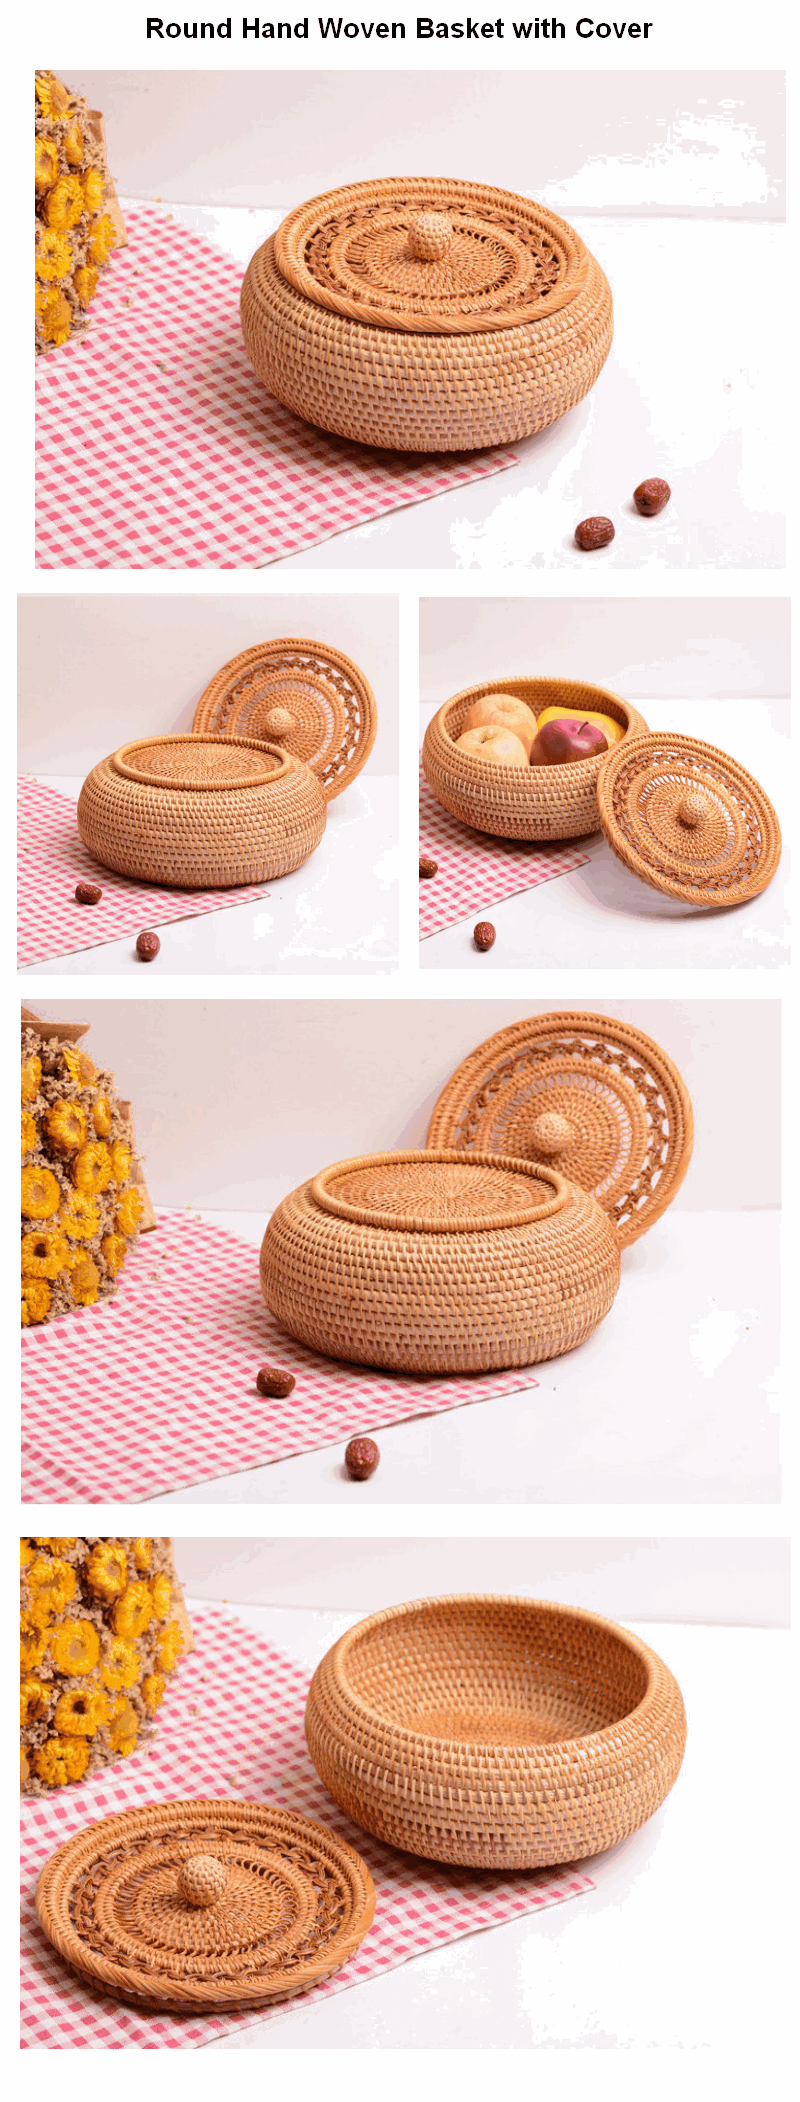 Lovely Hand Woven Storage Basket with Cover, Lovely Woven Basket, Vietnam Round Basket